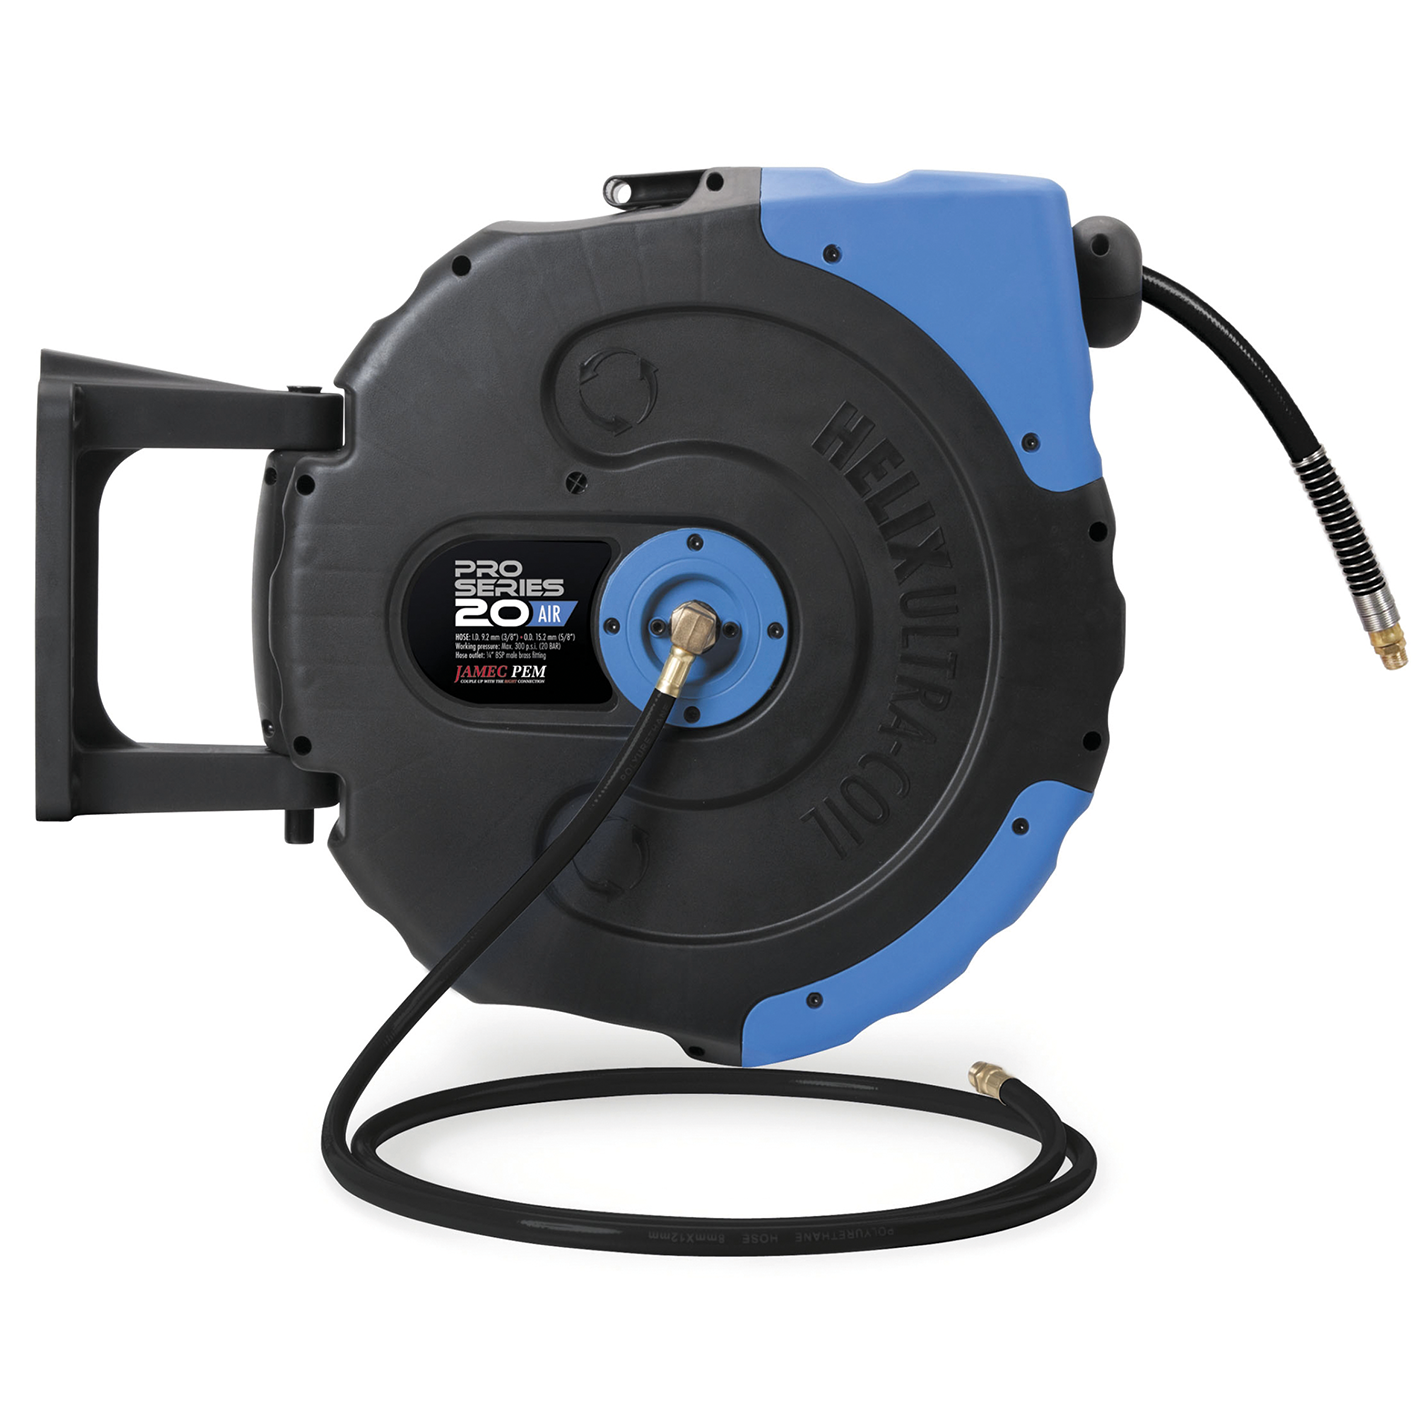 Havy Duty Air and Water Hose Reel comes with Hose